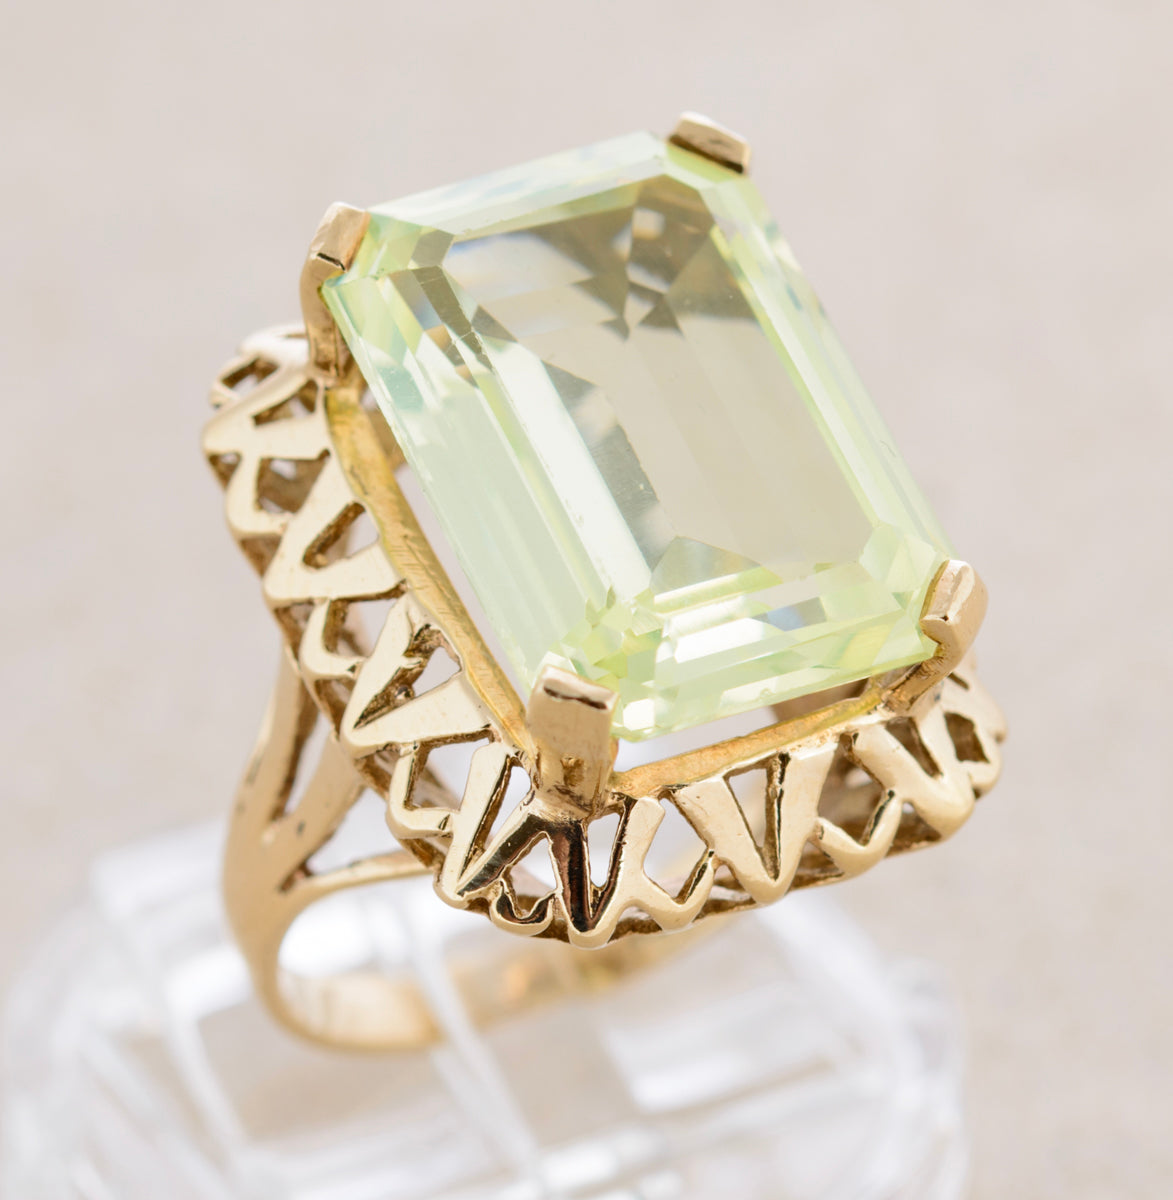 Vintage 9ct Gold Cocktail Ring Lab Created Spinel Gemstone Glows Under UV (A1760)